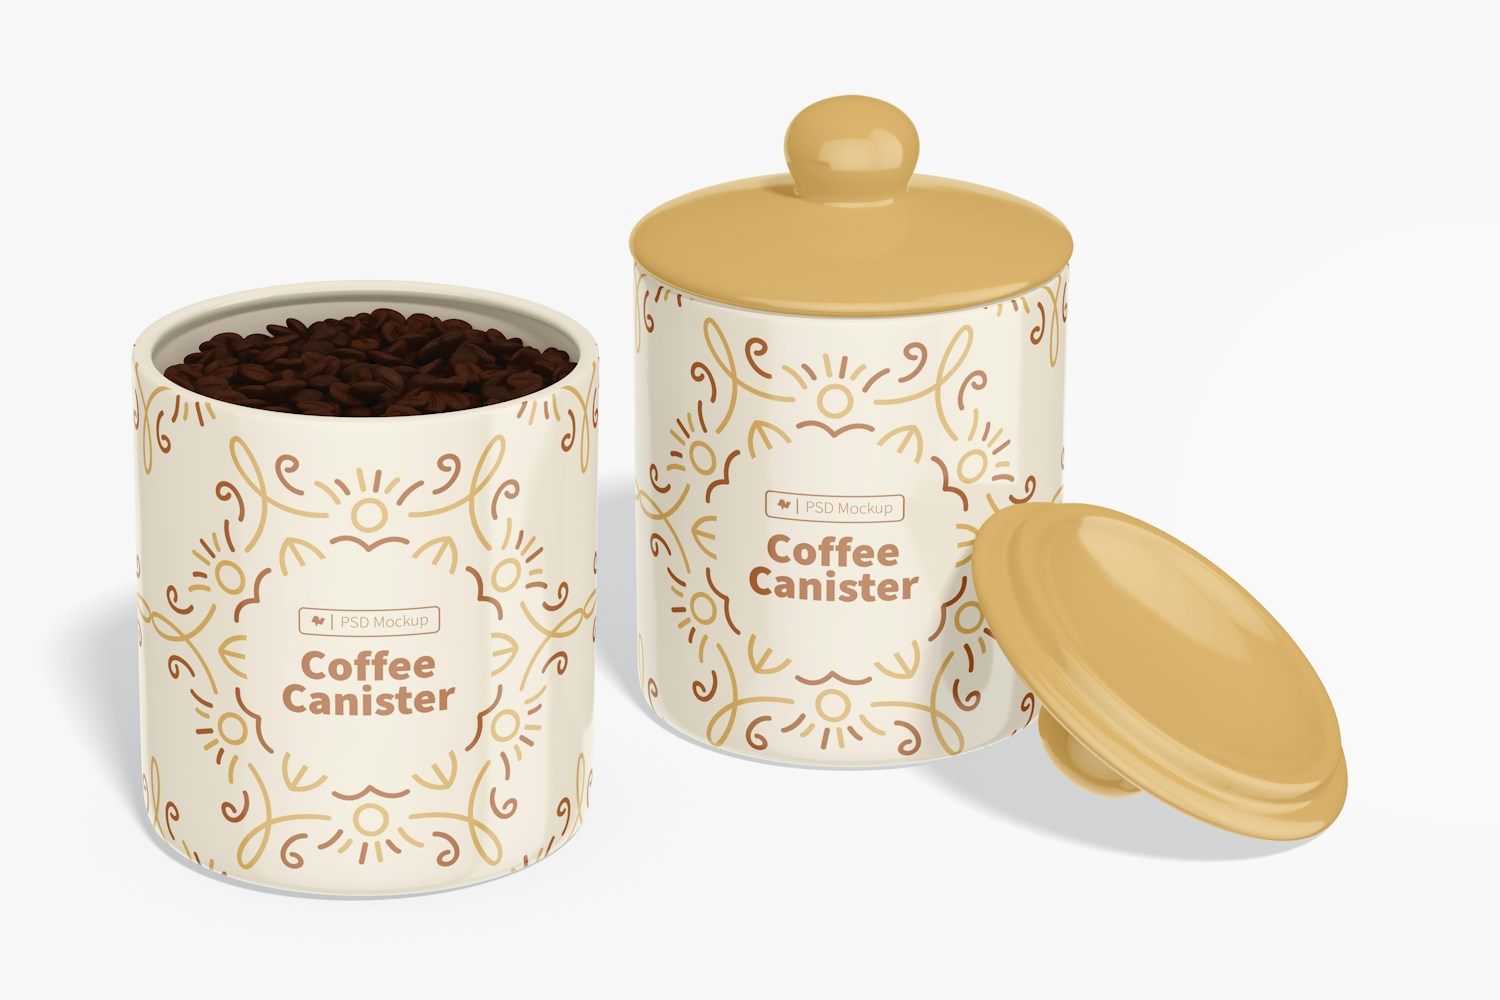 Coffee Canisters Mockup, Opened and Closed